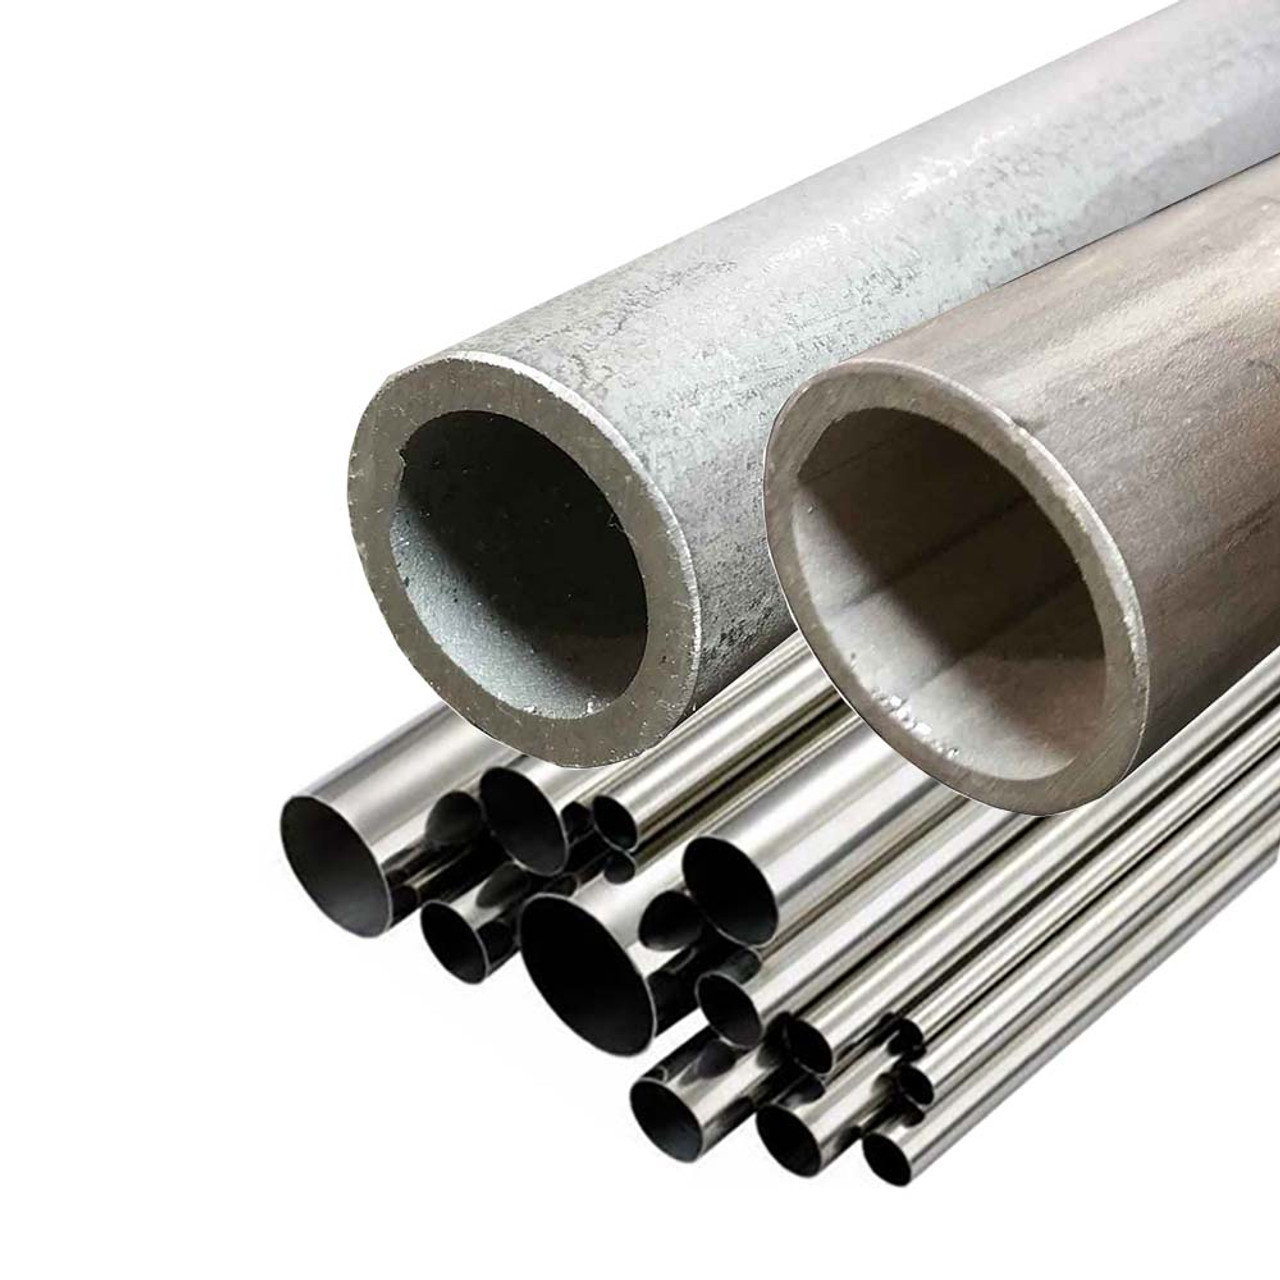 0.750" OD x 0.049" Wall x 36 inches (3 Pack), 304 Stainless Steel Round Tube, Welded